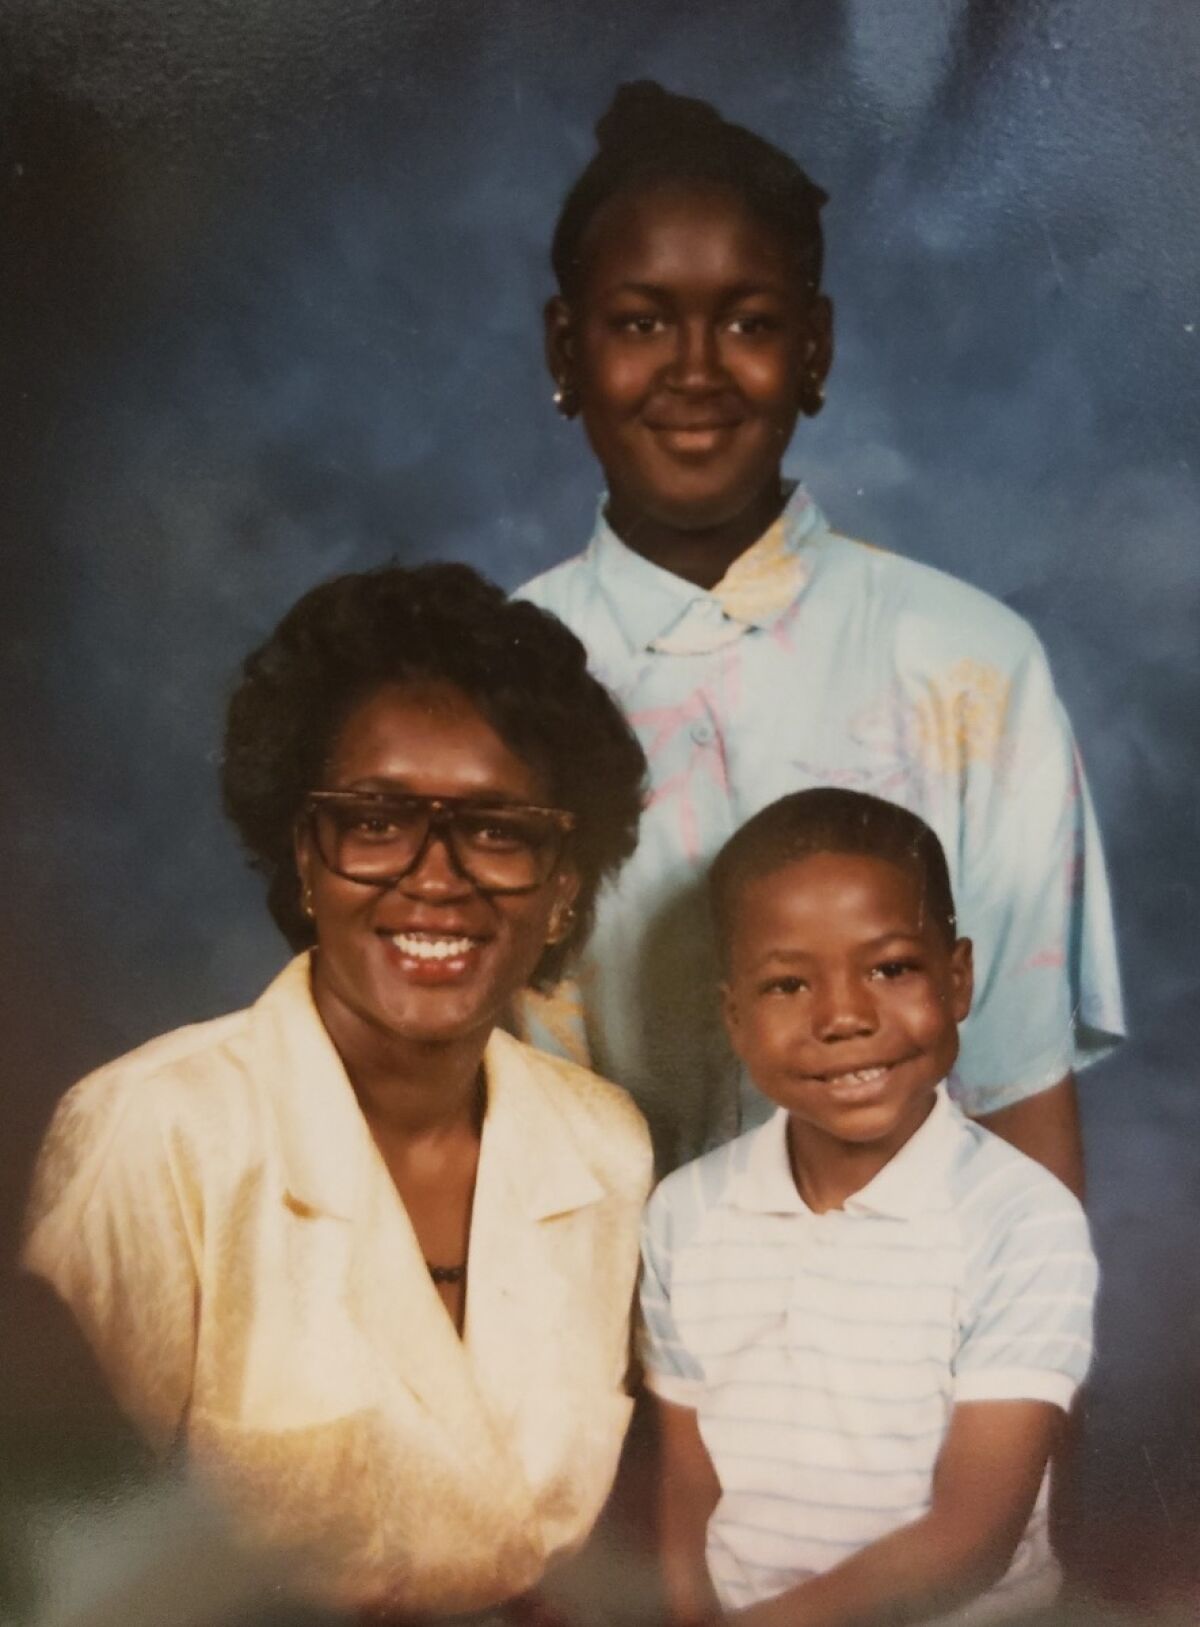 John Browner (then 5) pictured with his mother Margaret and sister Katherine in Chicago, 1985